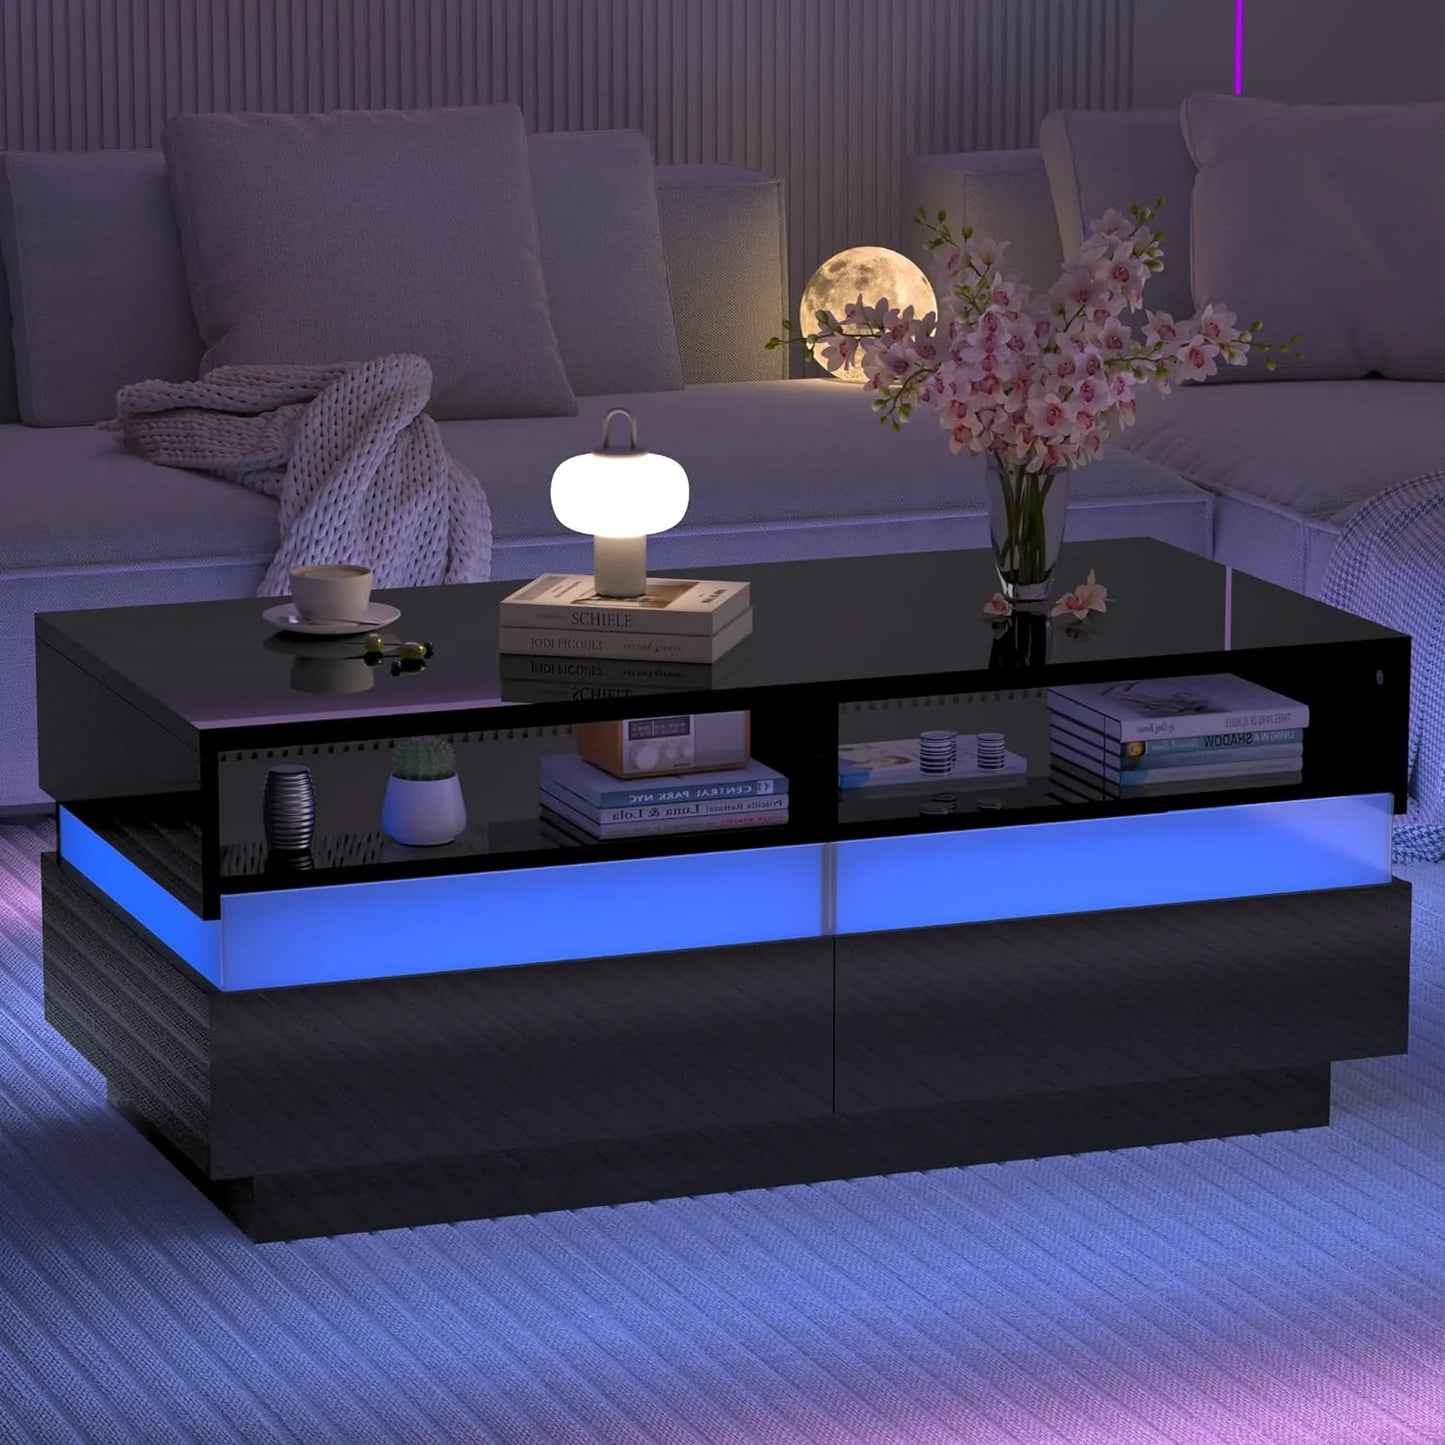 Modern LED Coffee Table W/ 2 Storage Drawers,High Glossy 2-Tier Black Coffee Table W/ 60000-Color LED Lights,App Control,Rectangle Center Table W/Open Shelf for Living Room Bedroom